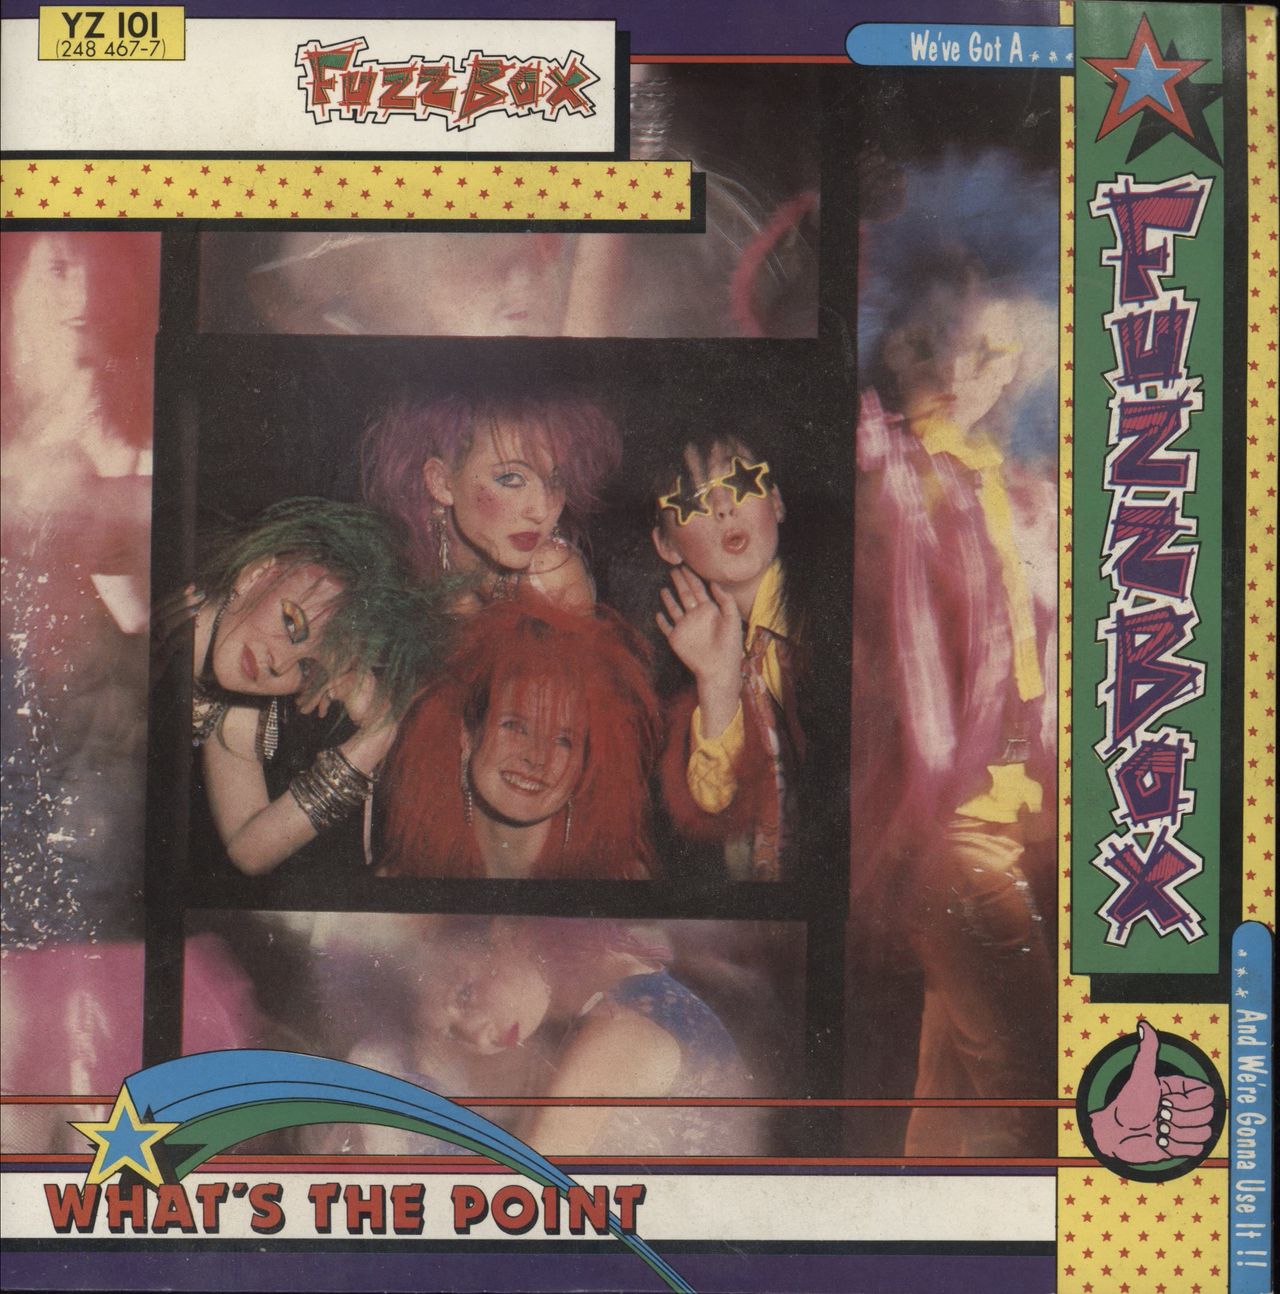 Fuzzbox What's The Point UK 7" vinyl single (7 inch record / 45) YZ101